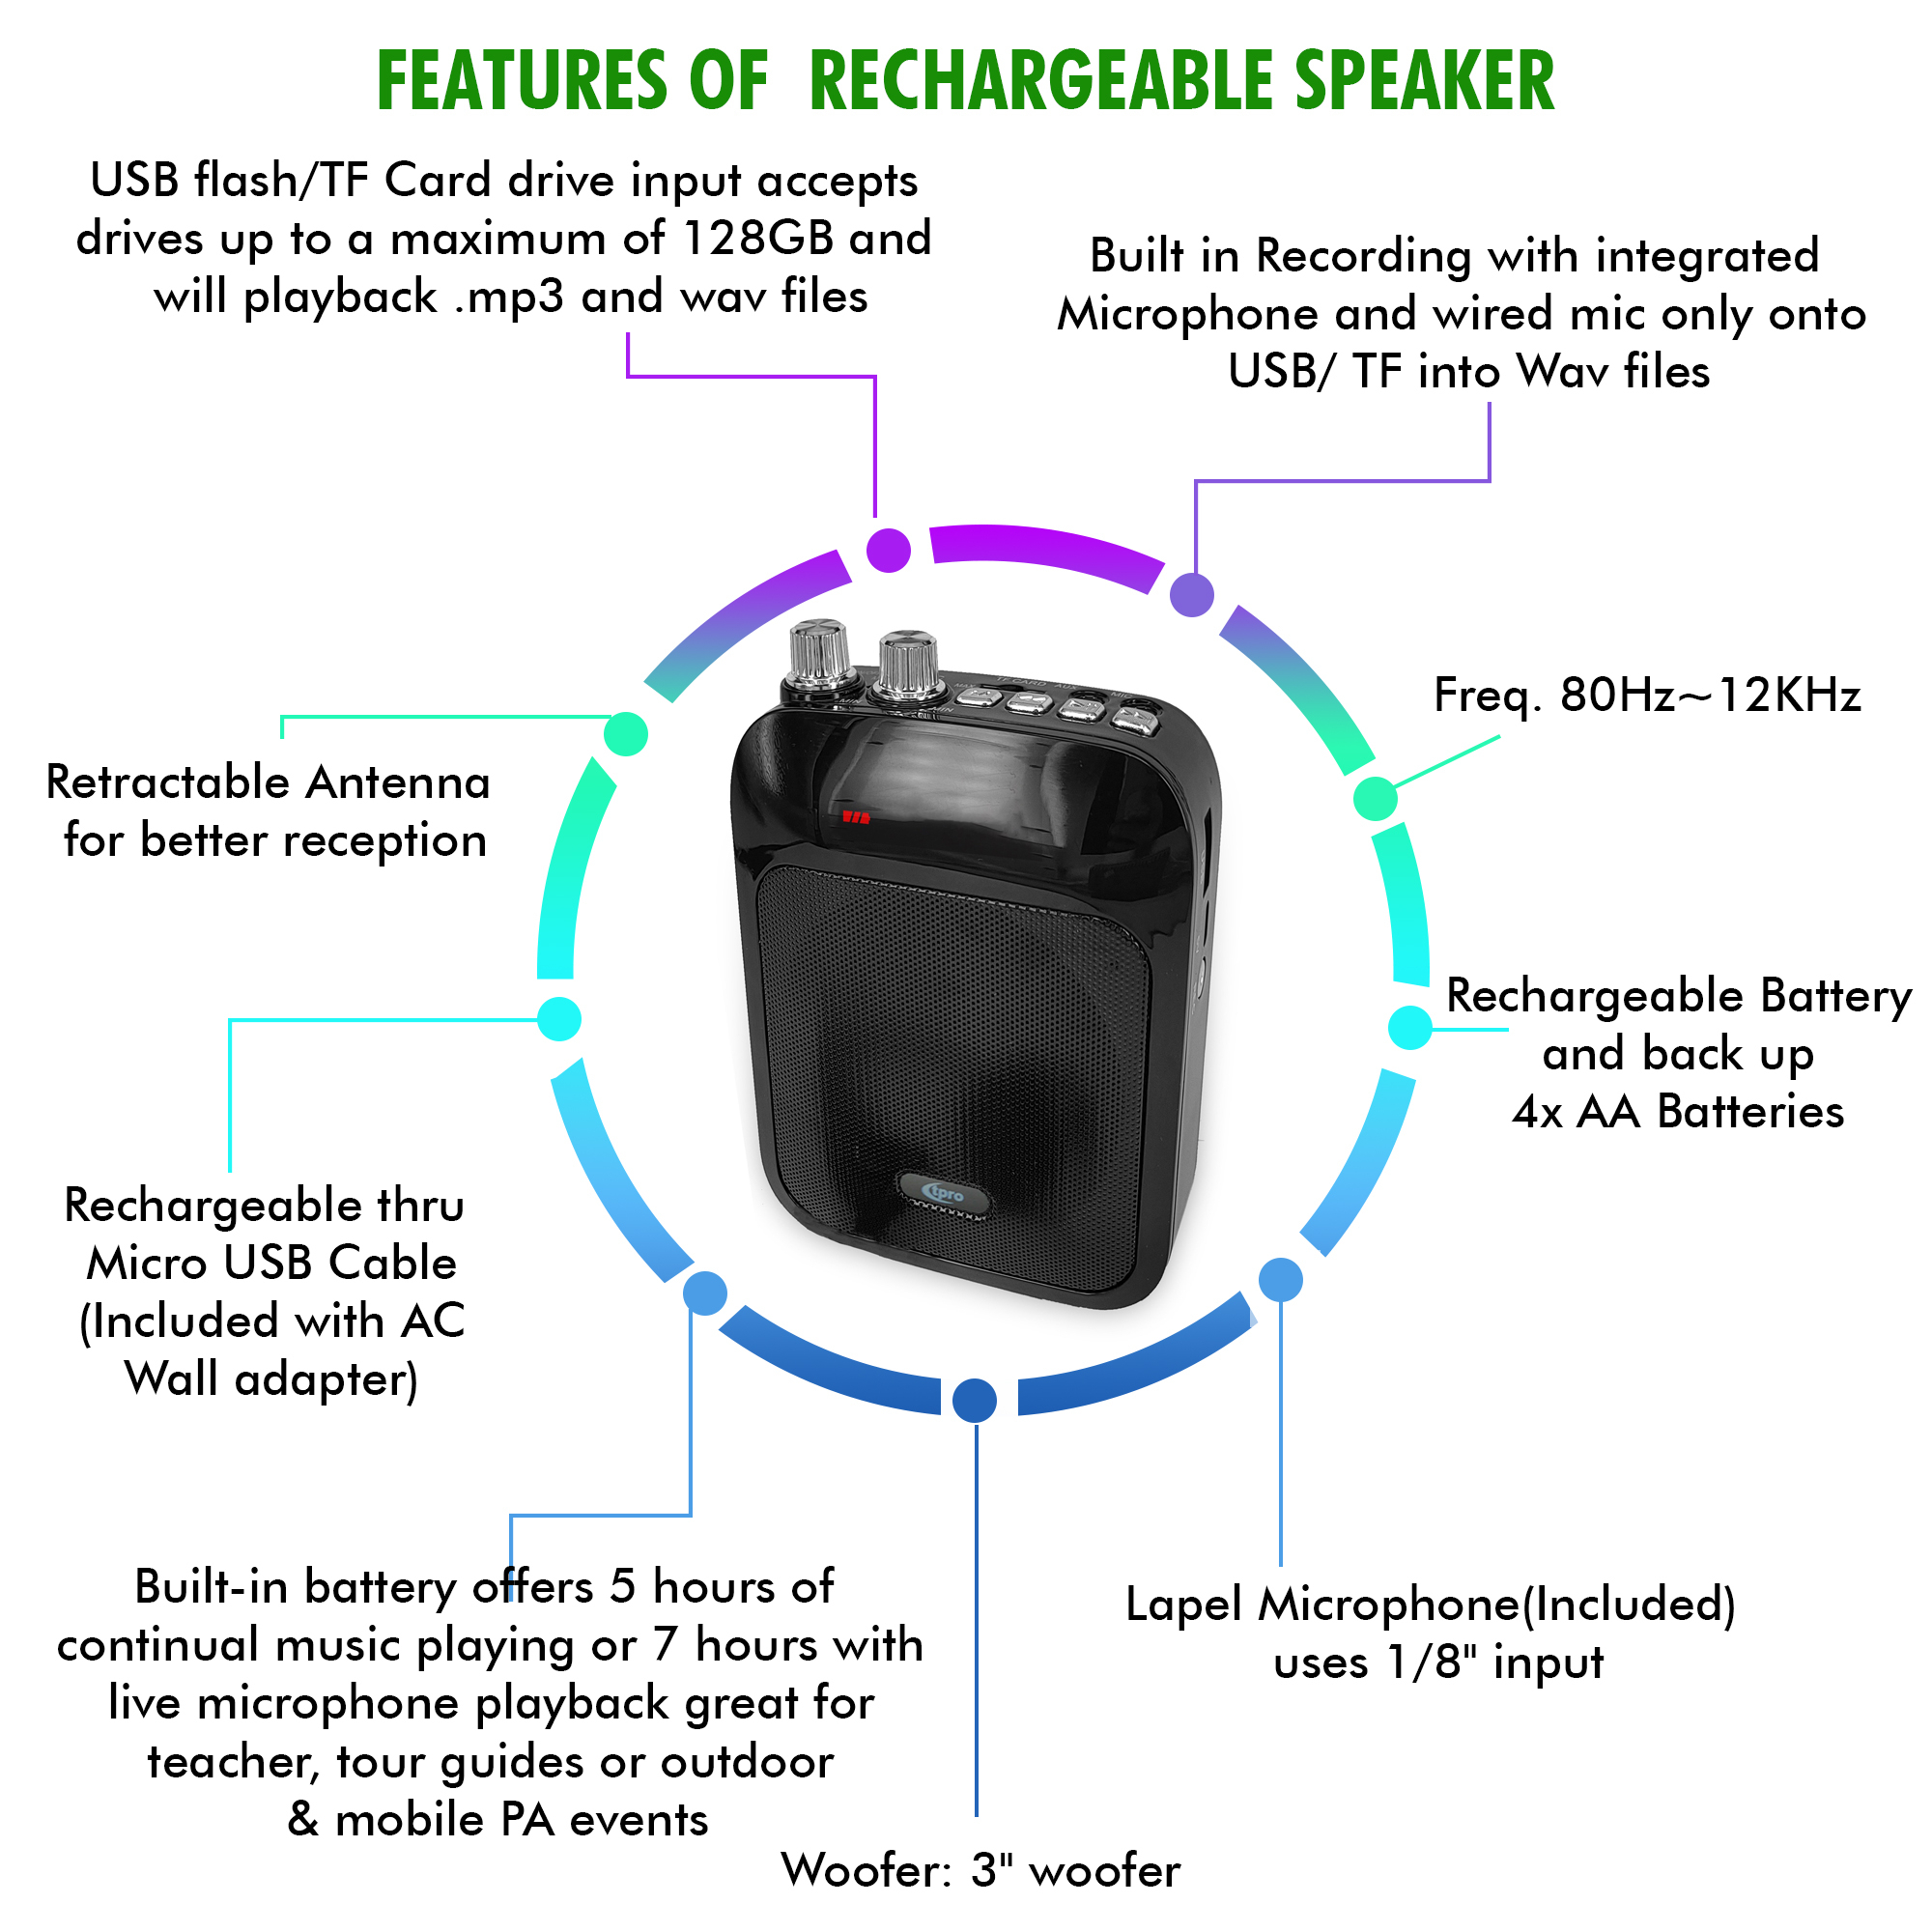 Technical Pro Rechargeable Speaker W/ Wired Lapel Mic, Music Mode, USB, SD Card, FM, 1/8 AUX, Mic Inputs, Clip On & Shoulder Strap